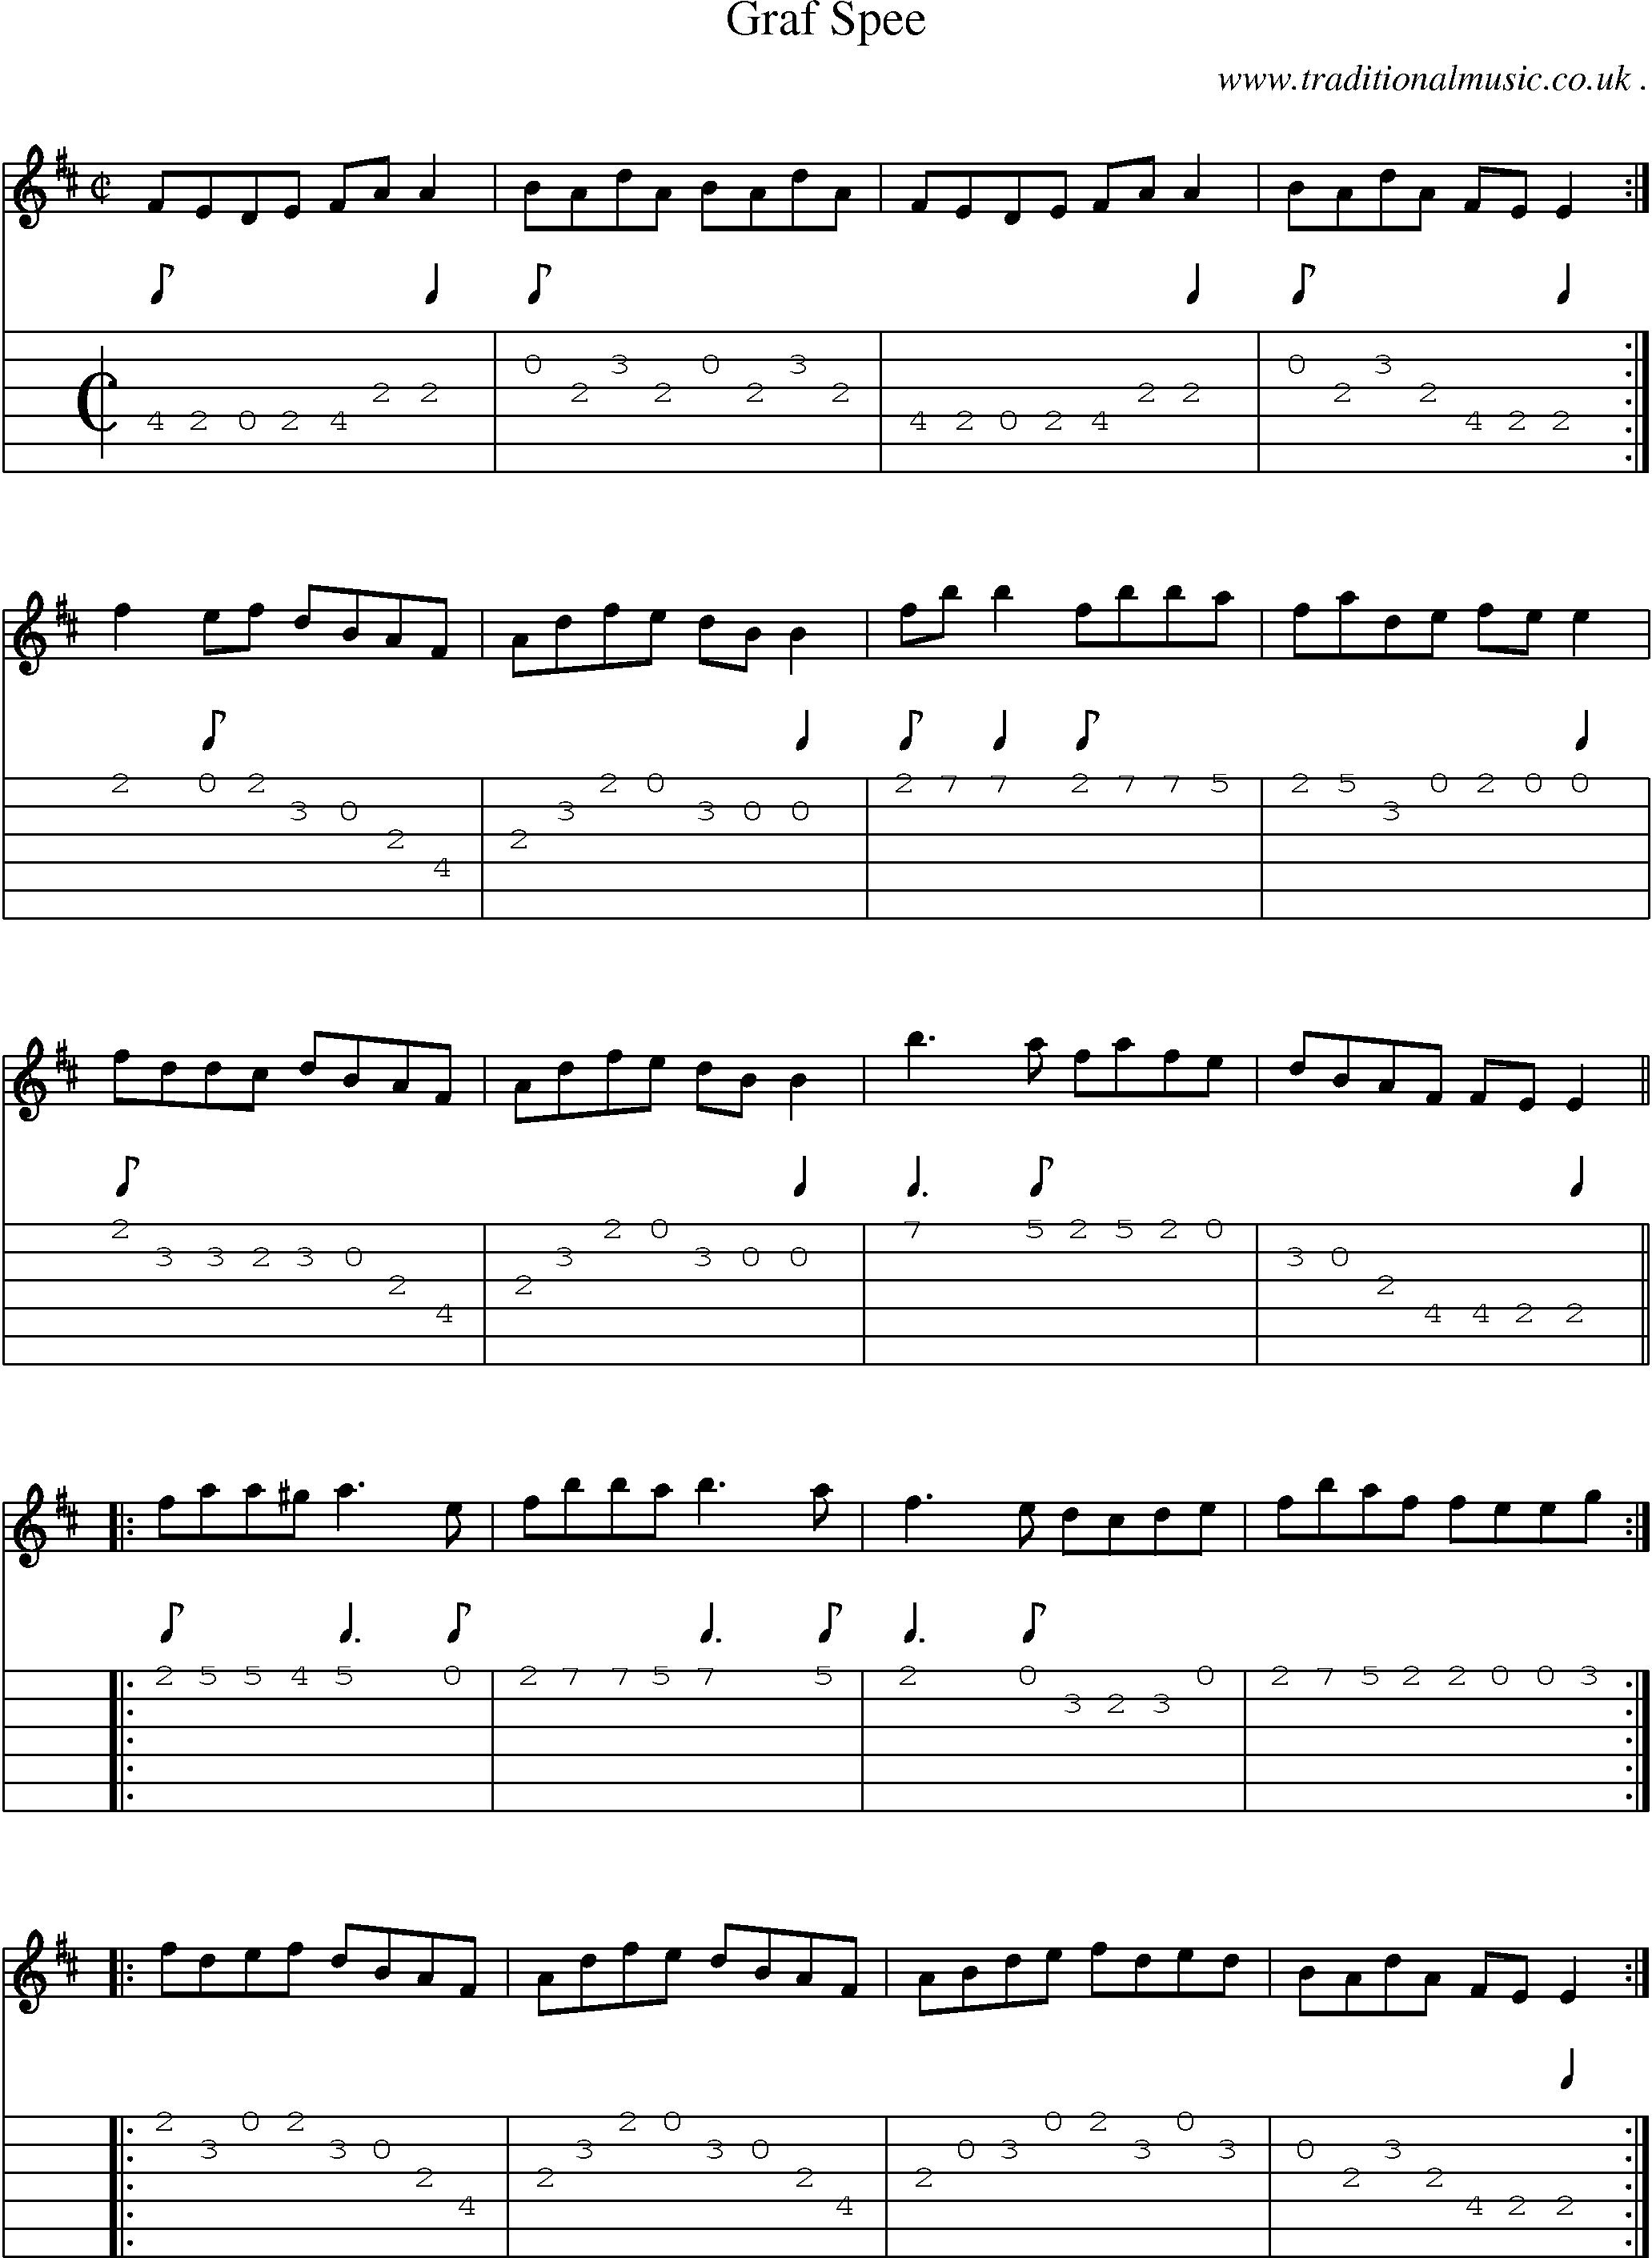 Sheet-Music and Guitar Tabs for Graf Spee